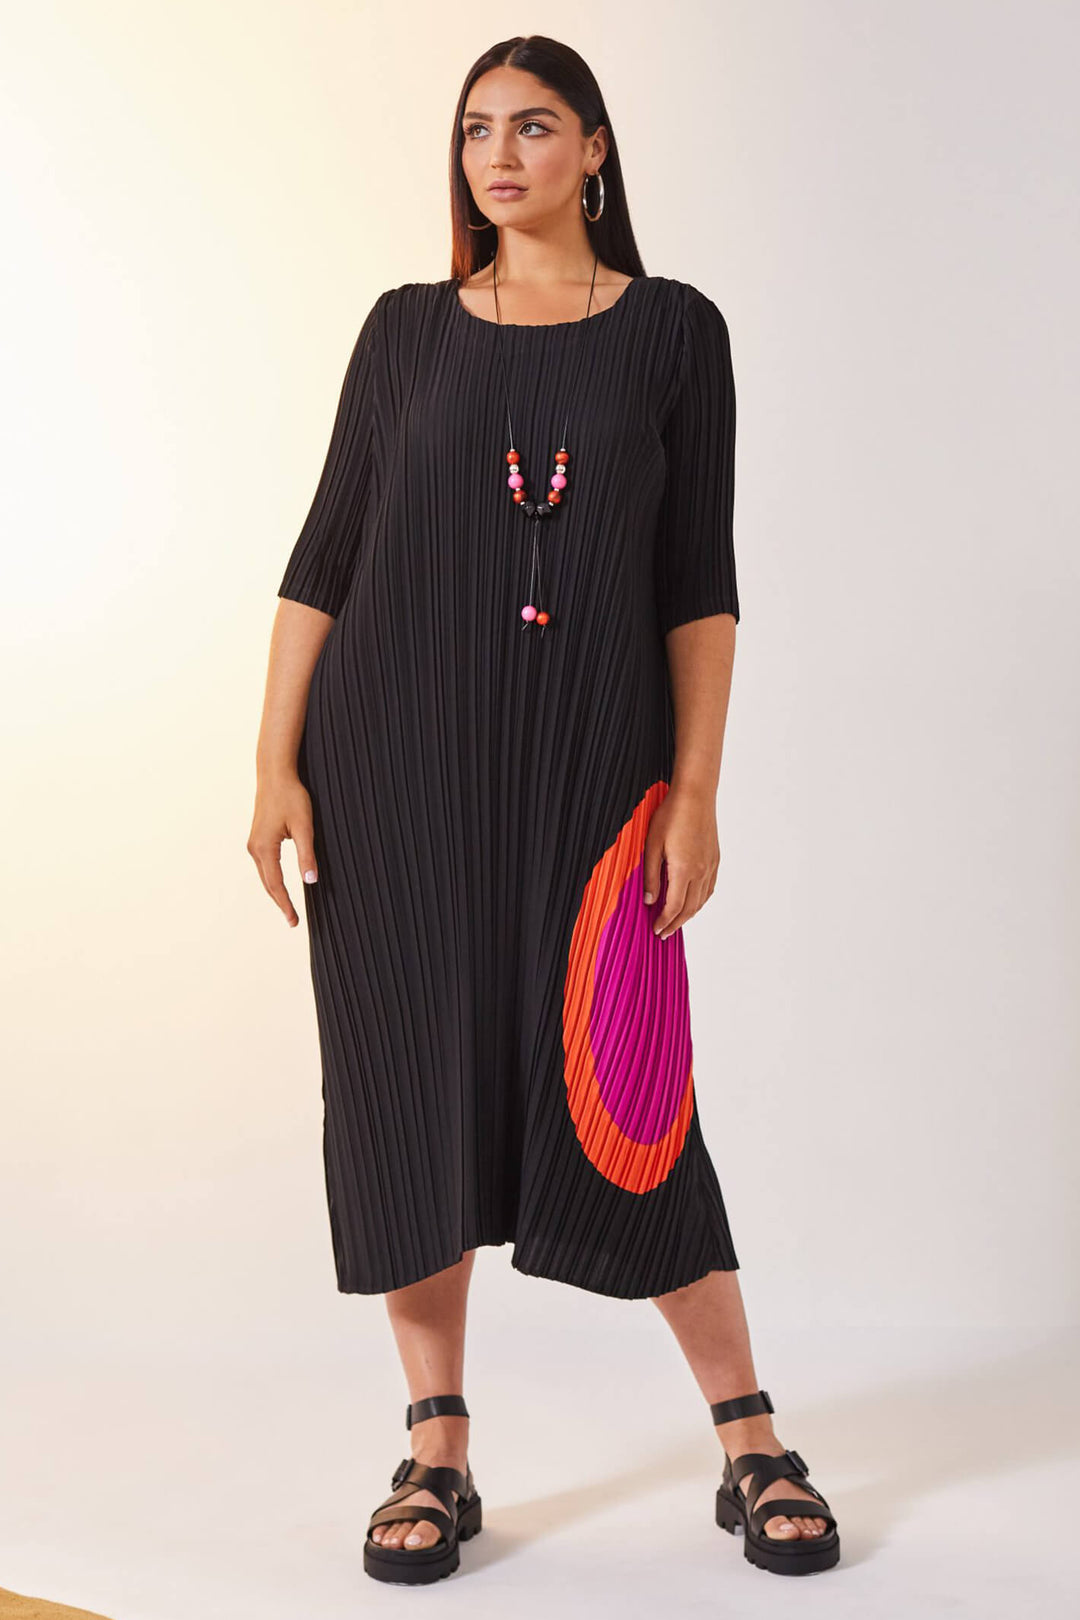 Ora ORS23 109 Black & Pink Pleated Dress With Necklace - Experience Boutique